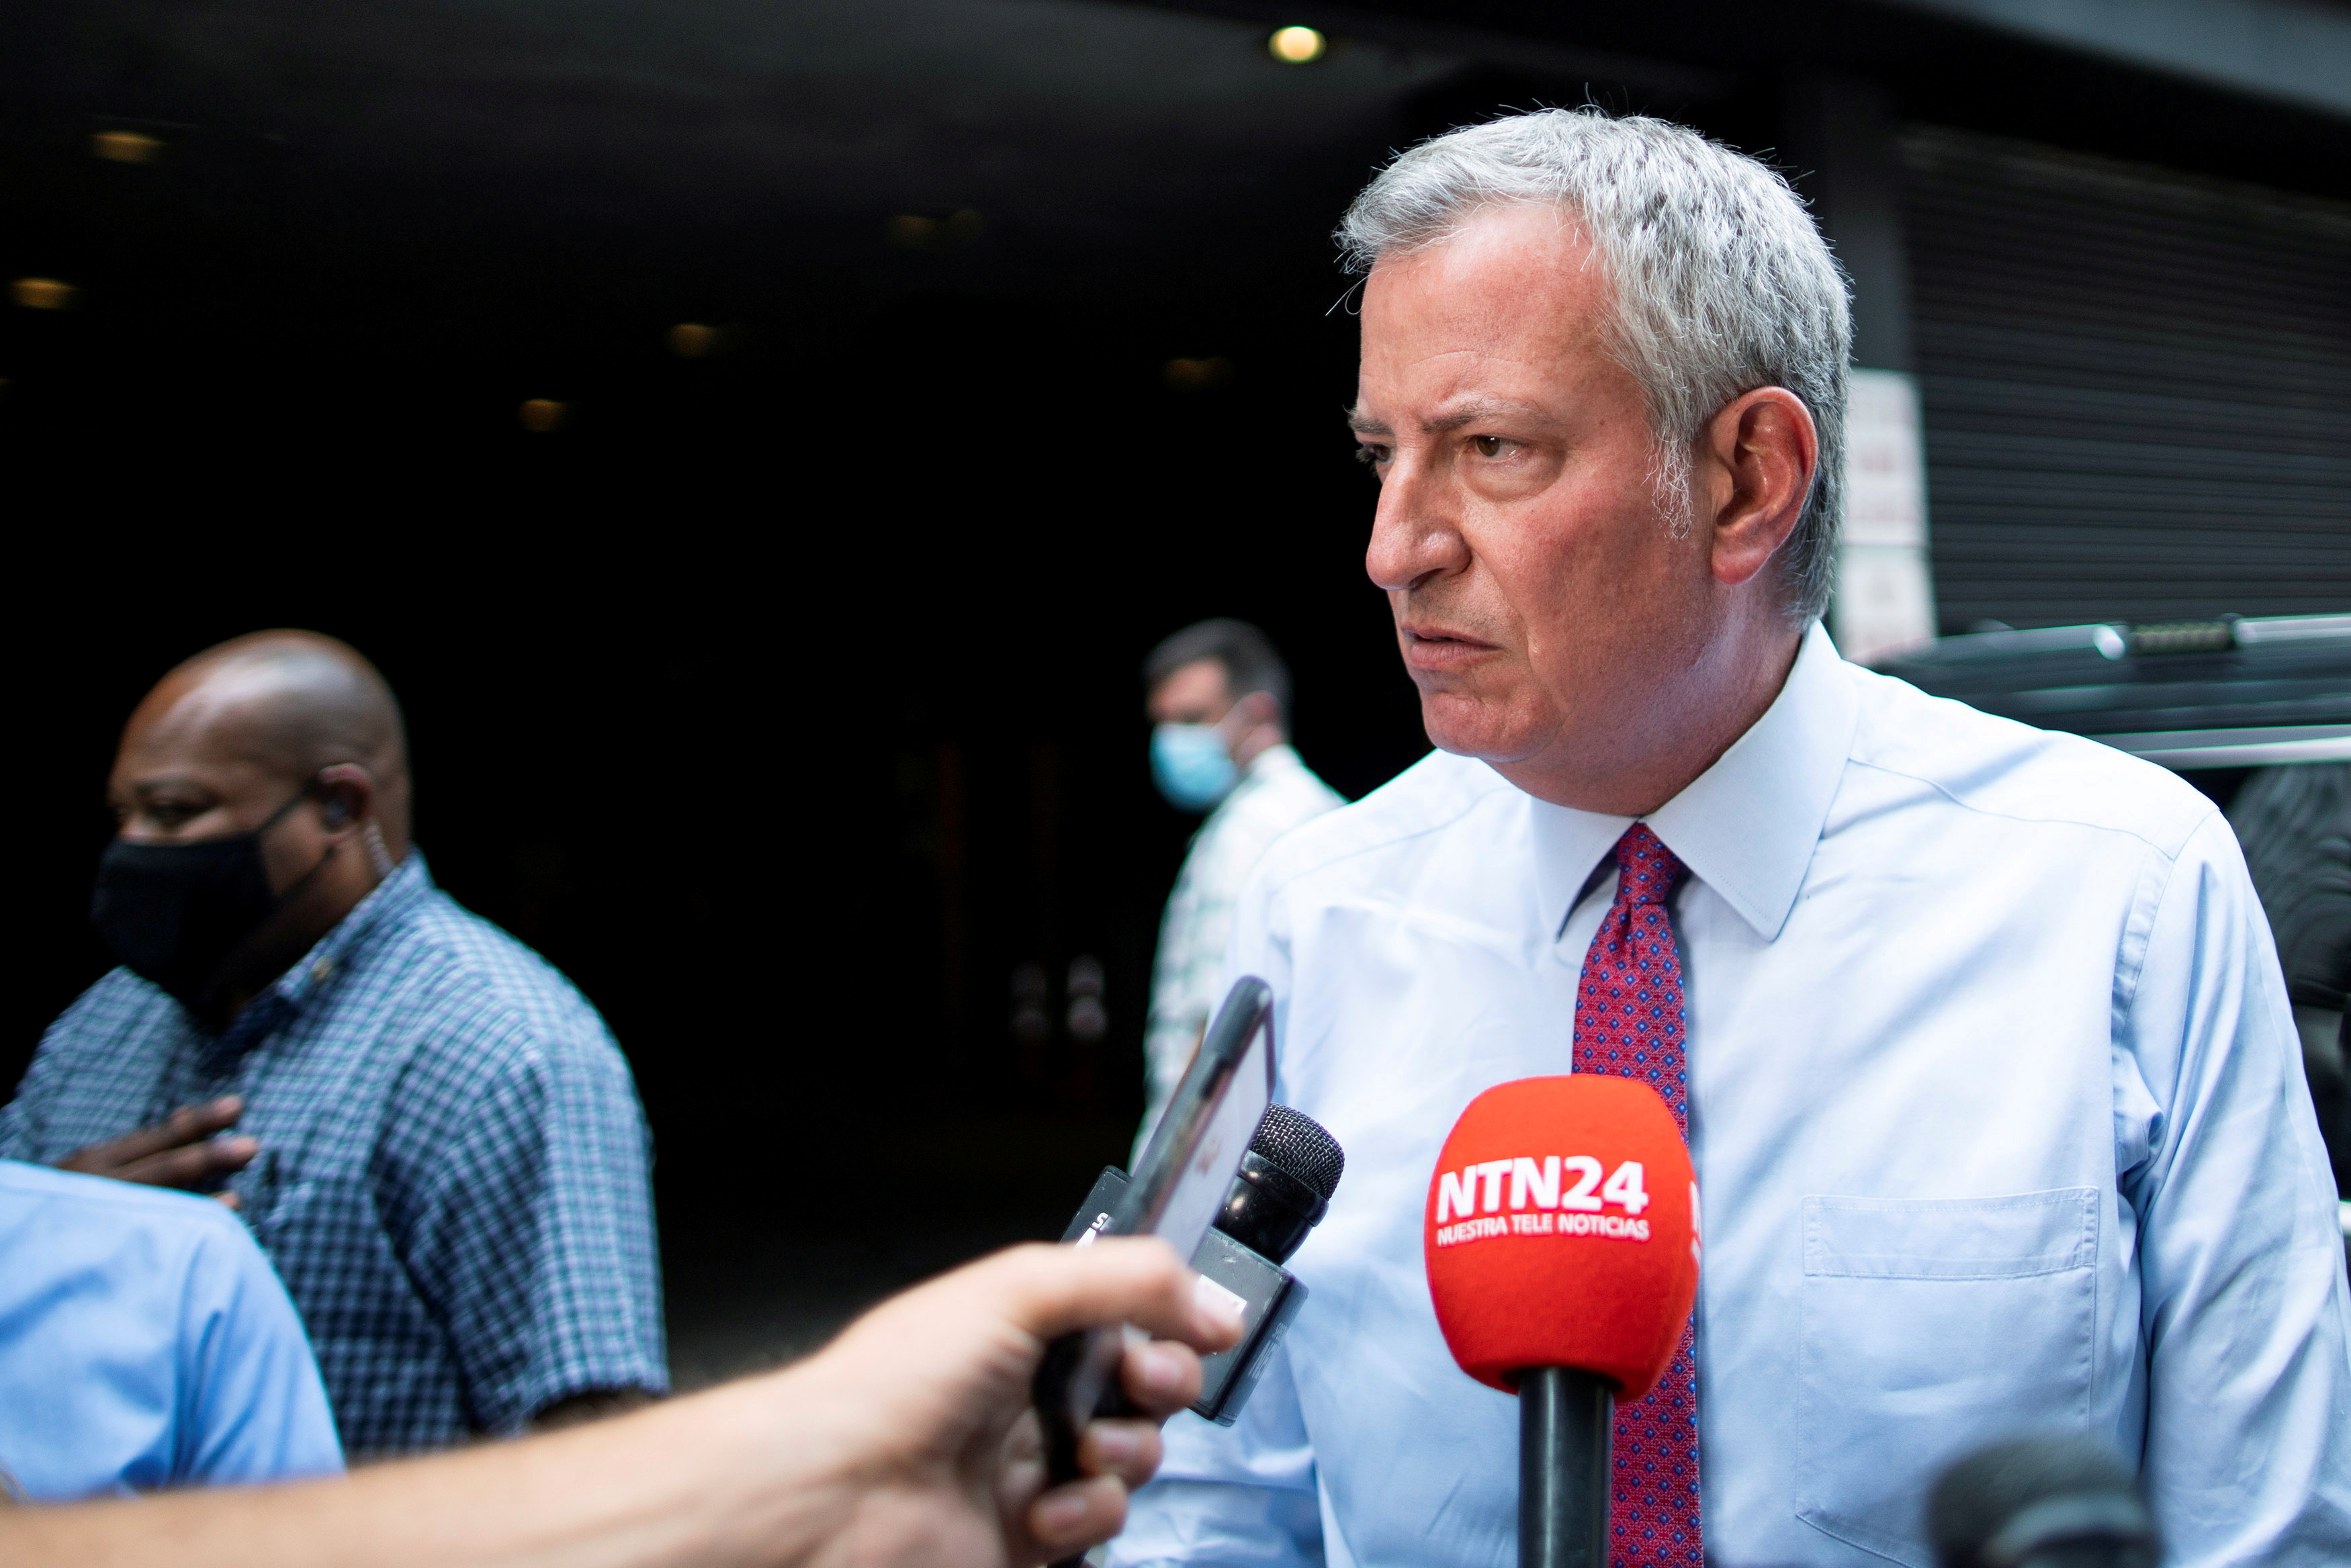 NYC Mayor Bill de Blasio gives his remarks to the media in New York